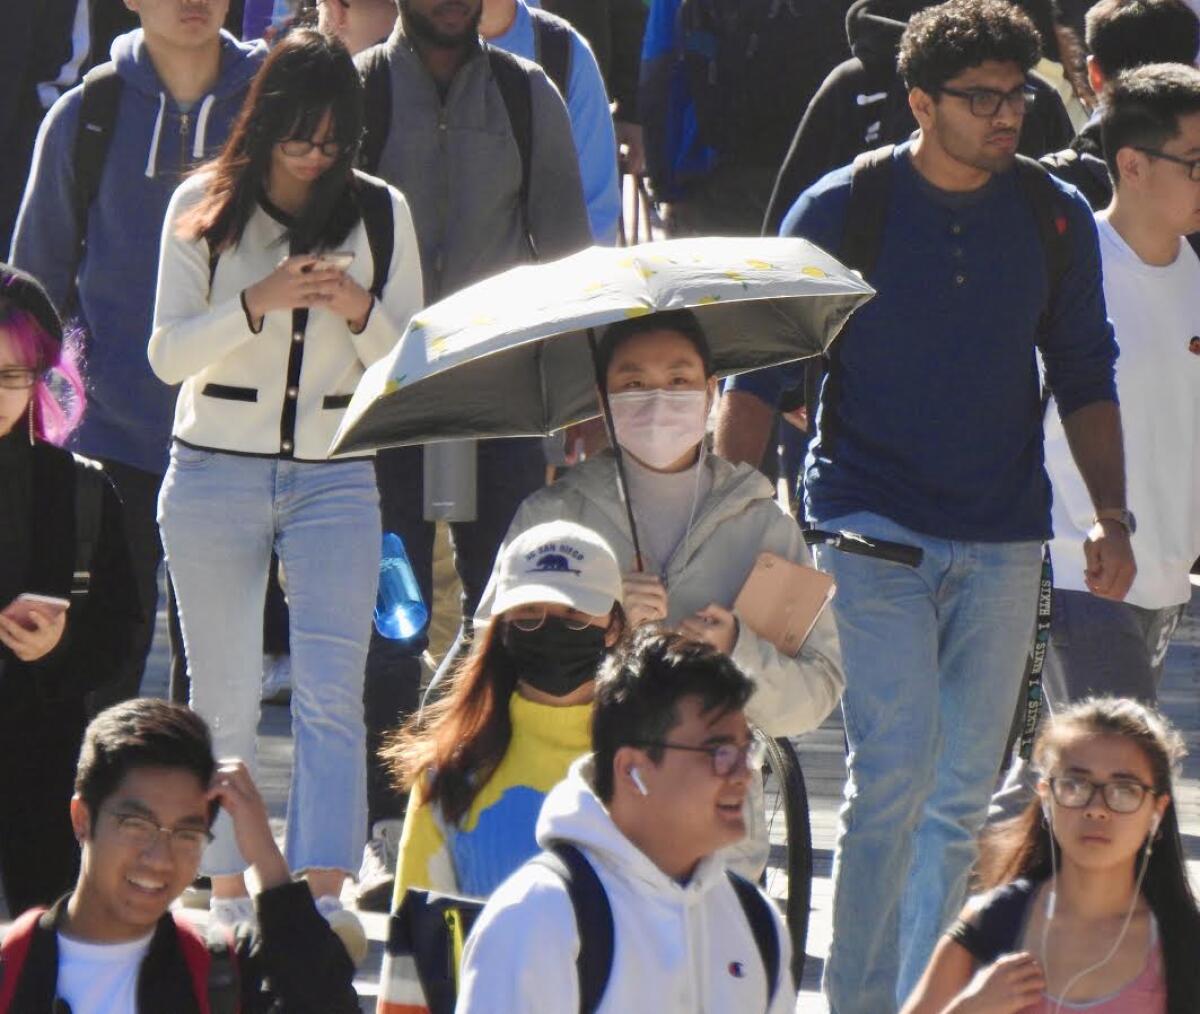 Roughly 9,000 of UC San Diego's 39,000 students are from other countries.